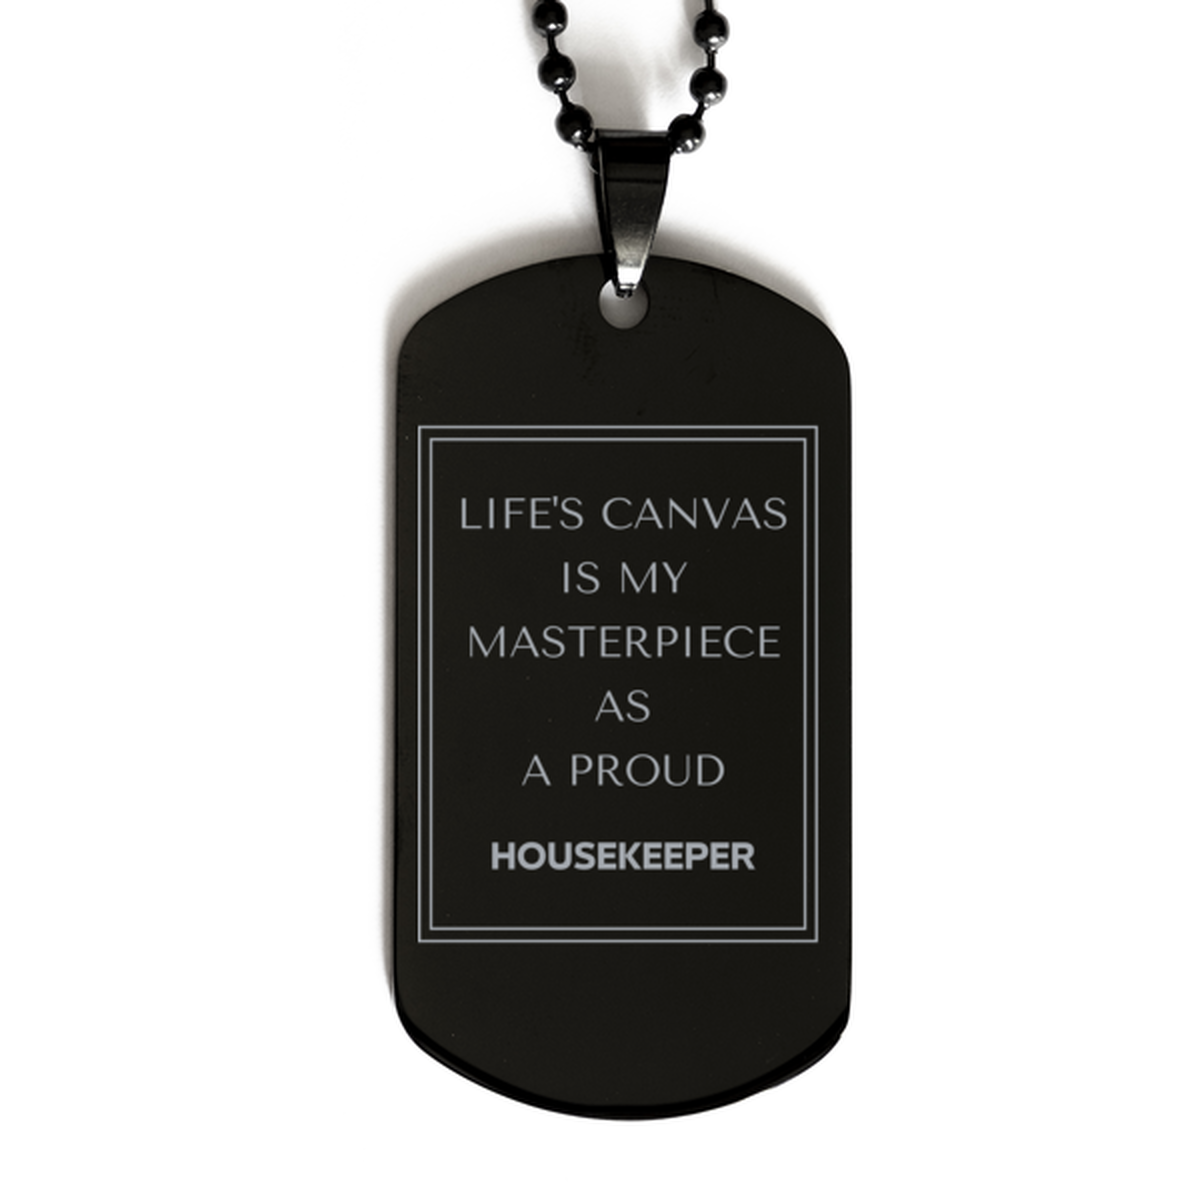 Proud Housekeeper Gifts, Life's canvas is my masterpiece, Epic Birthday Christmas Unique Black Dog Tag For Housekeeper, Coworkers, Men, Women, Friends